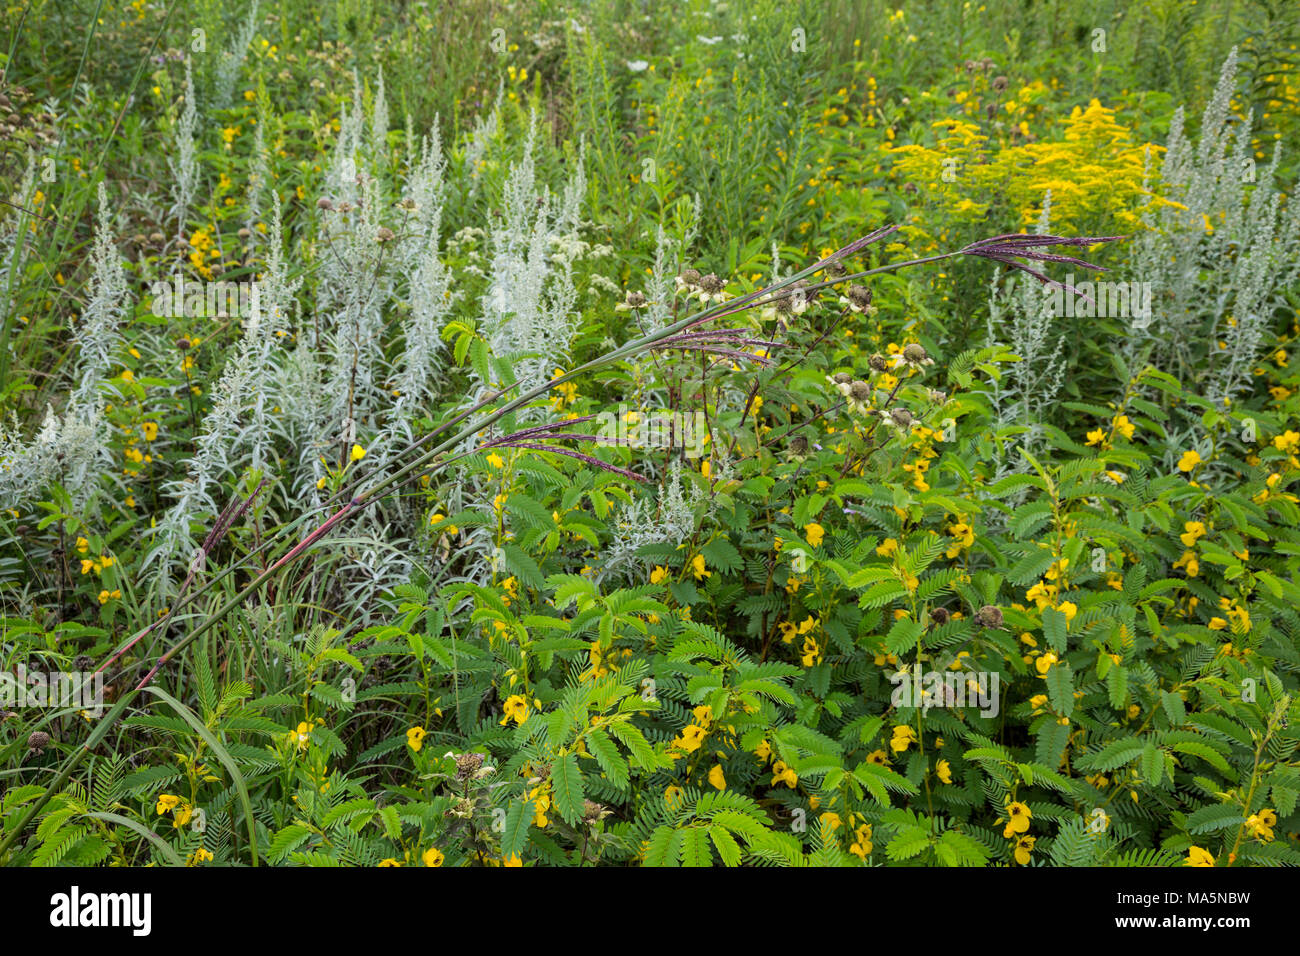 A Conservation Reserve Preserving Indigenous Species:  Bluestem leans diagonally from lower left across assorted wild grasses and flowers.  Iowa. Stock Photo